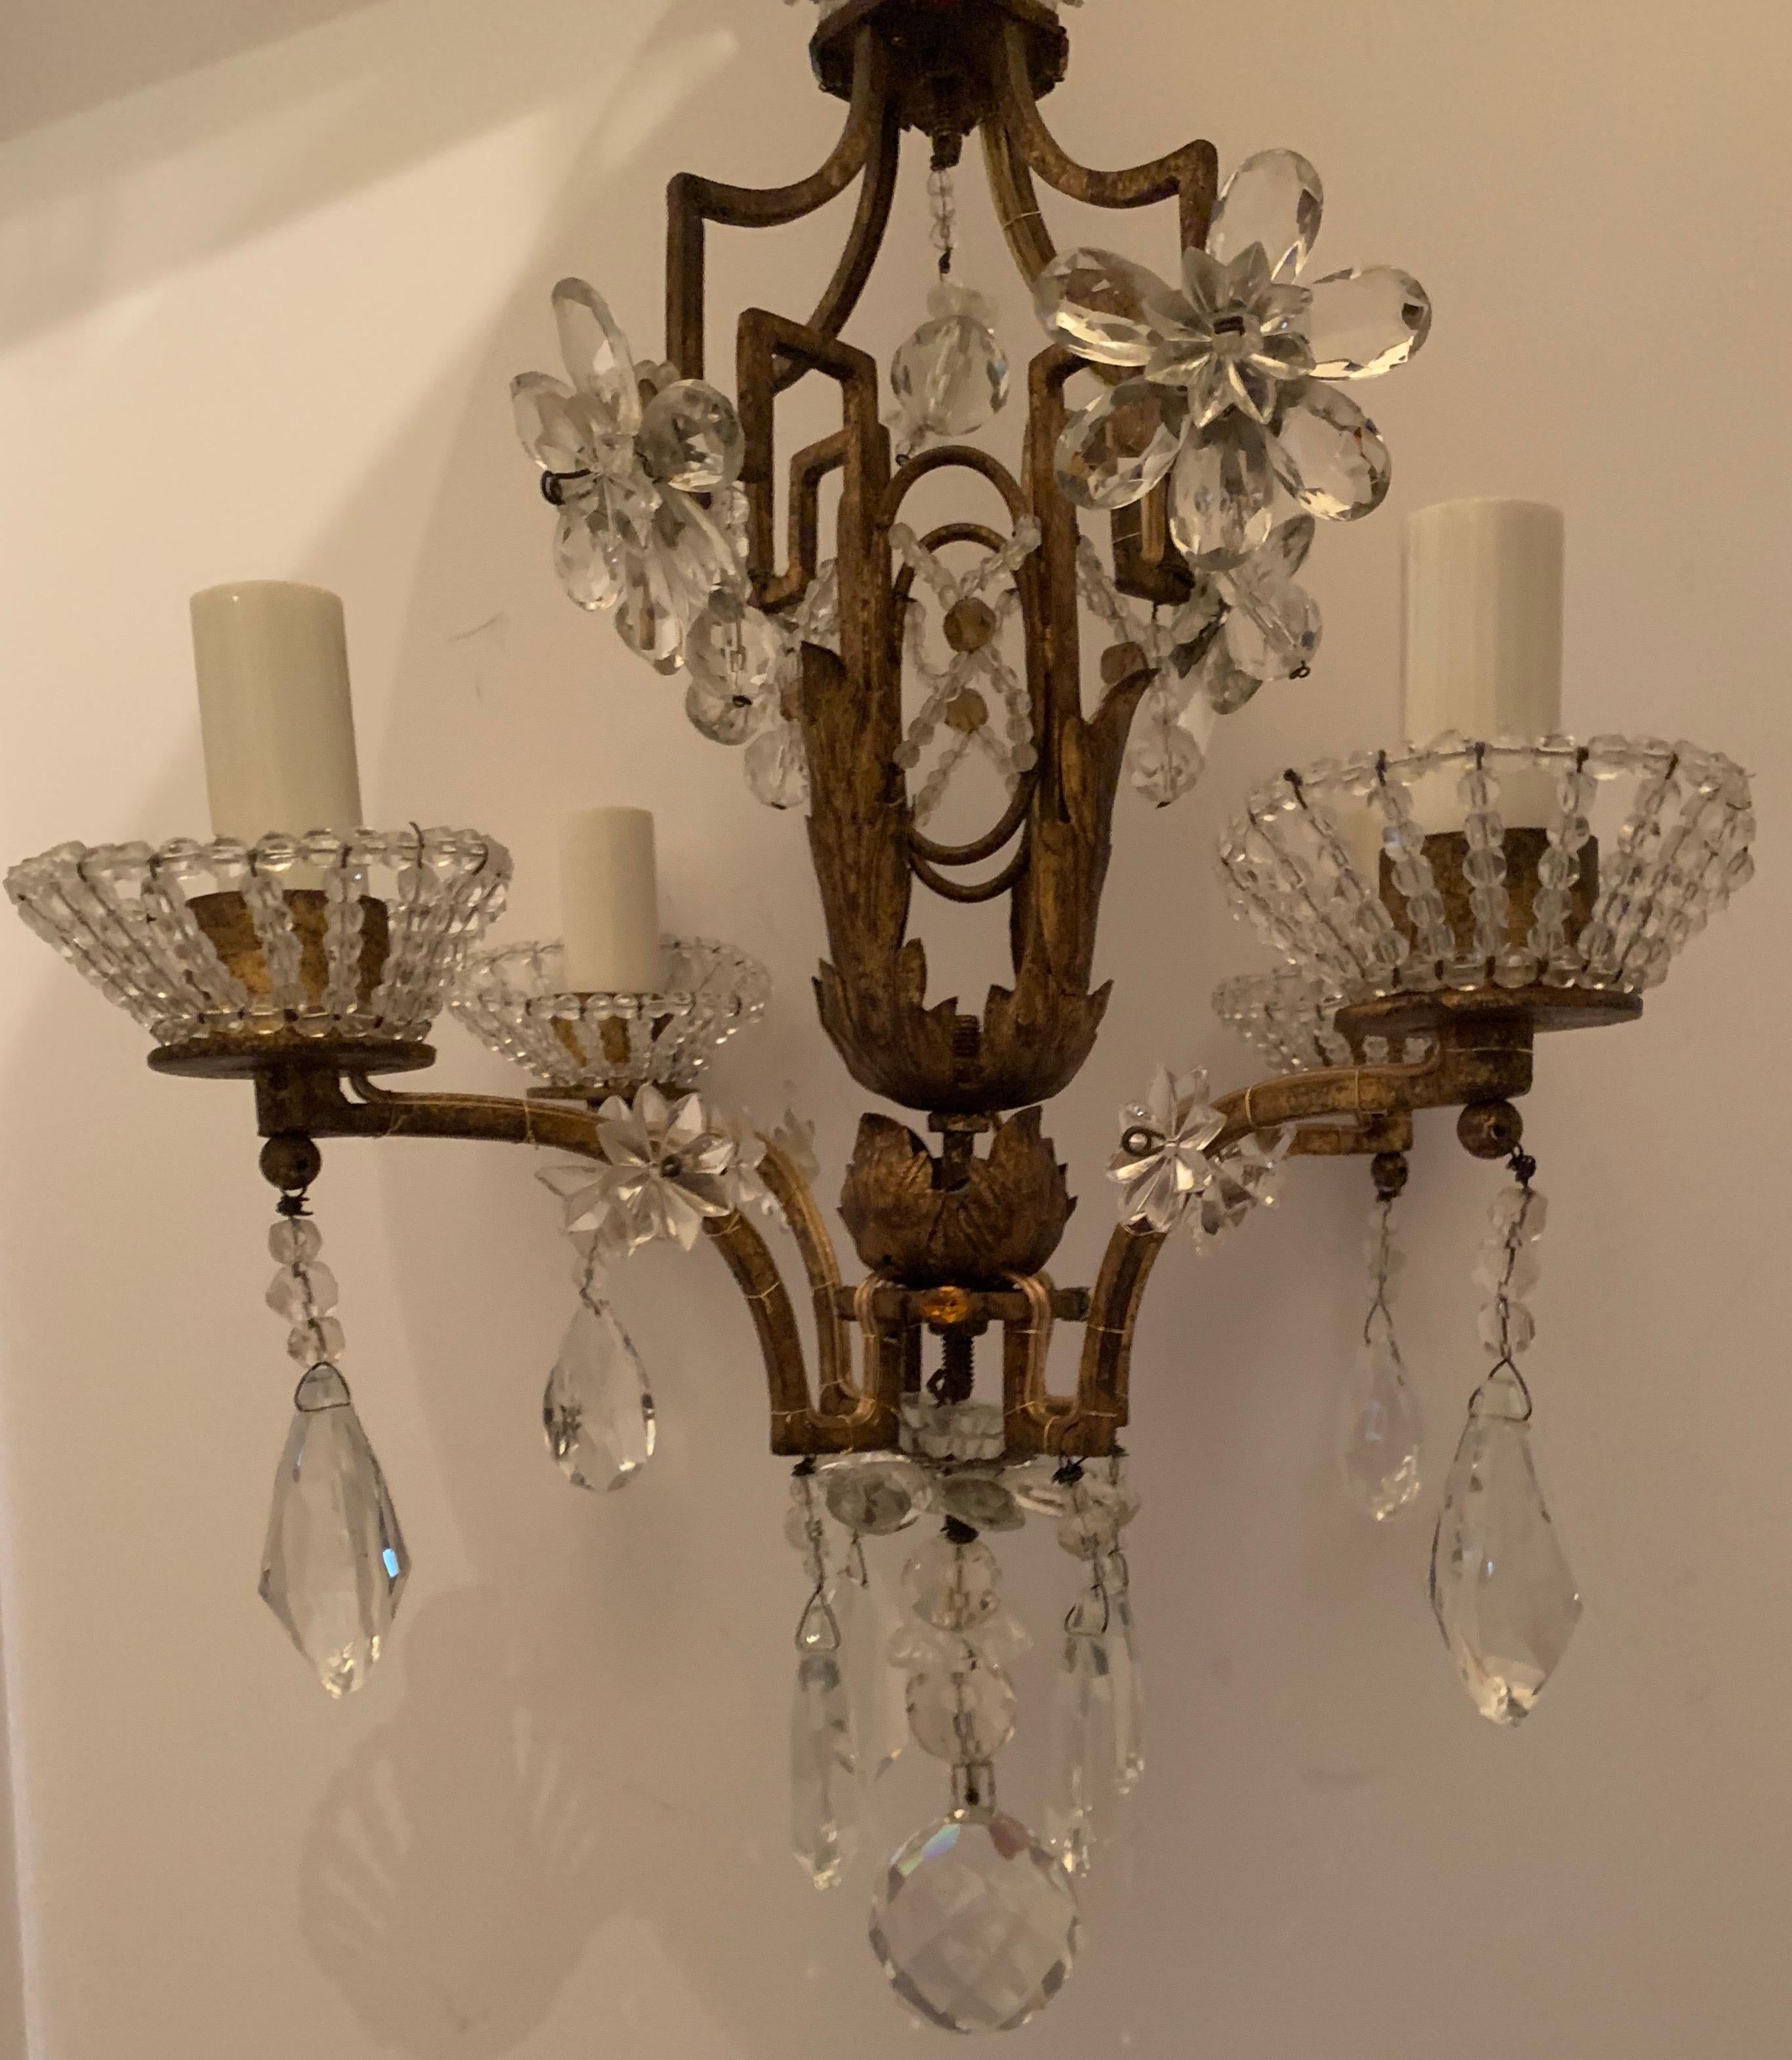 A wonderful Bagues style French gold gilt crystal beaded petite chandelier four-light fixture with a beautiful crown and surrounded by crystal stars.
The perfect piece for any small space.